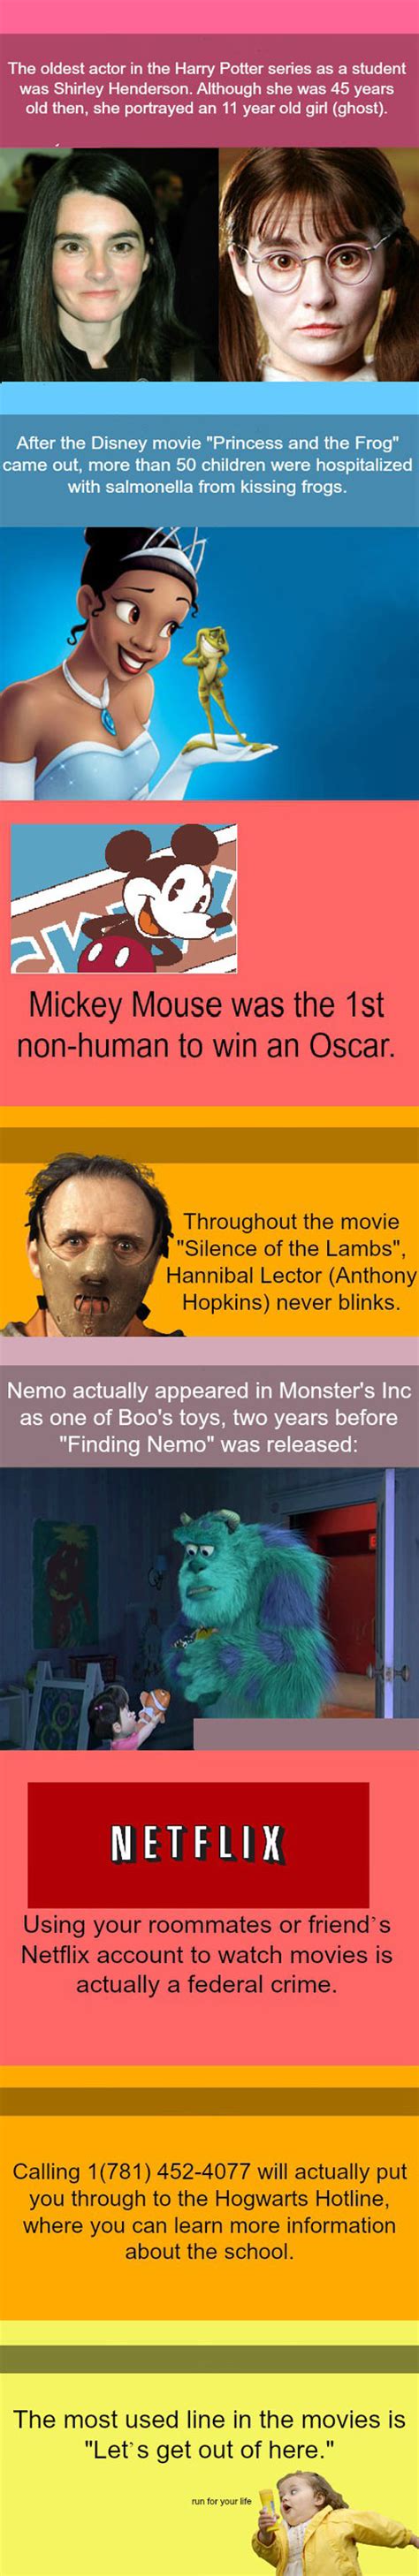 some useless movie facts… things i find amusing funny fun facts movie facts